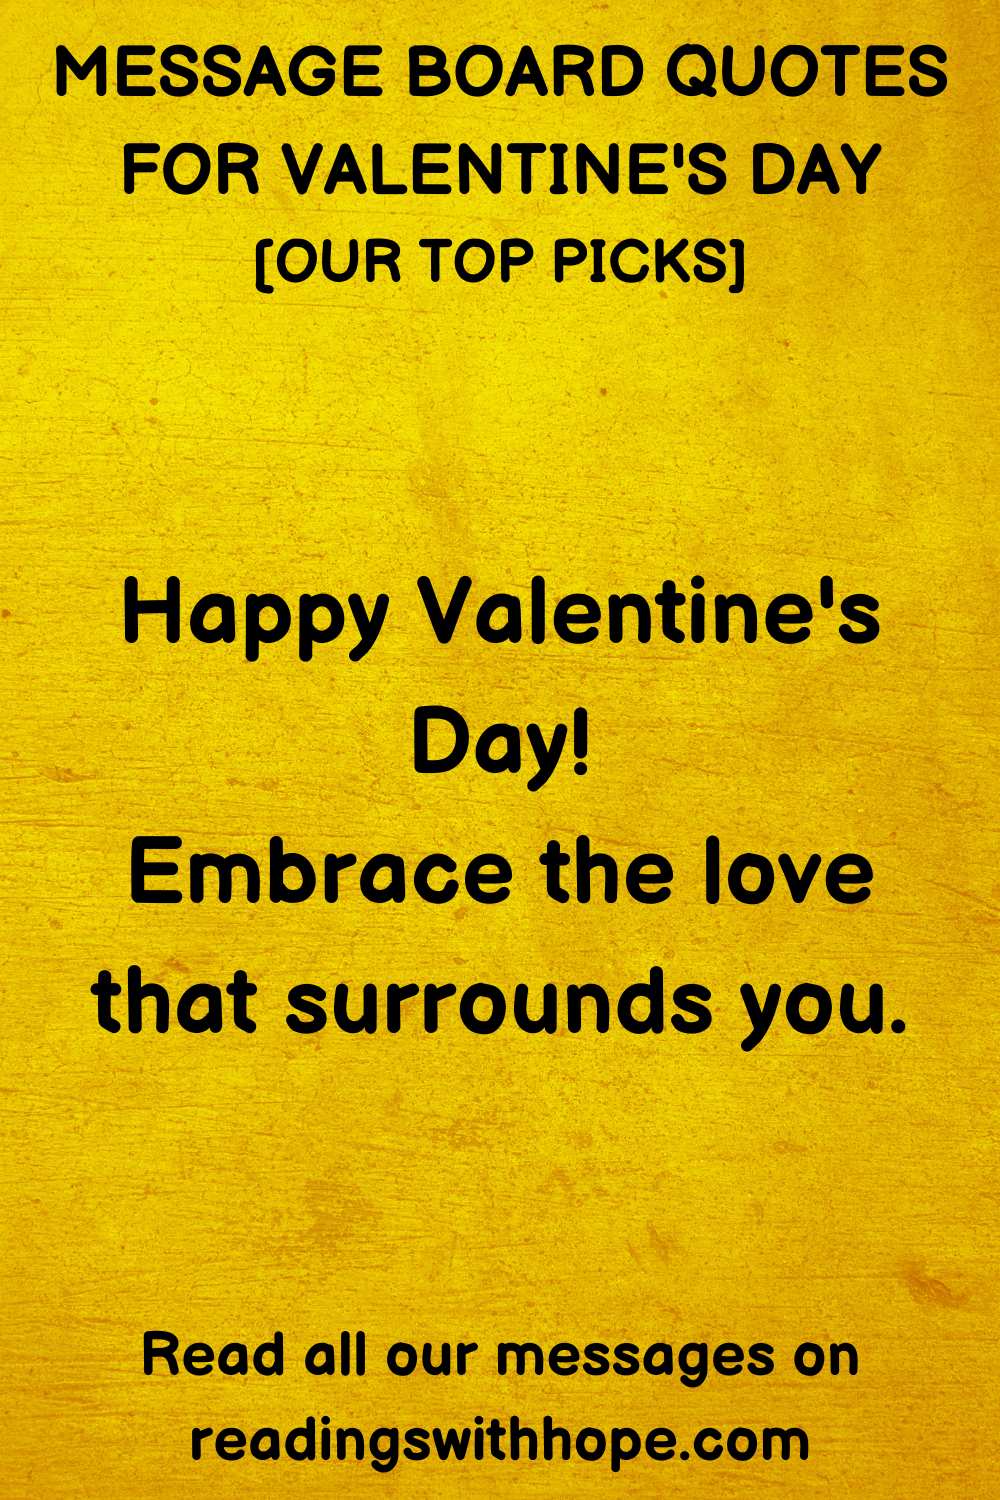 140 Message Board Quotes for Valentine's Day